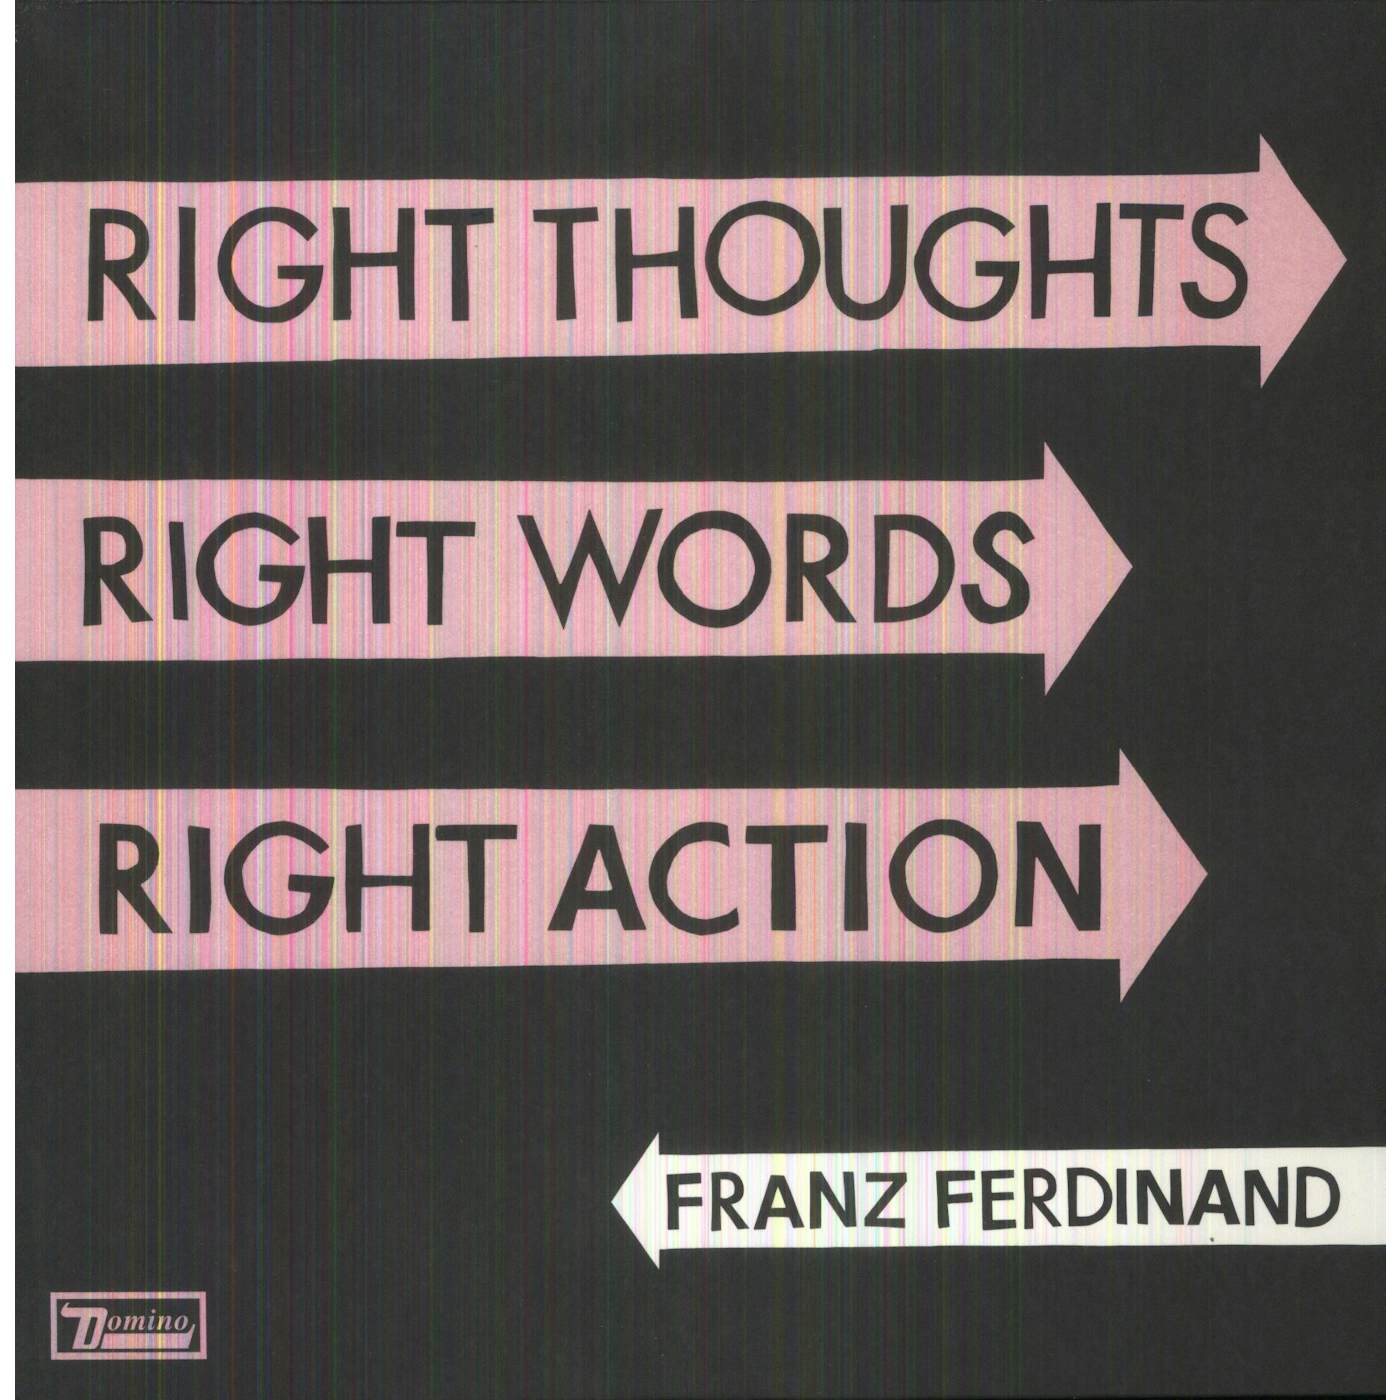 Franz Ferdinand RIGHT THOUGHTS, RIGHT WORDS, RIGHT ACTION (DL CARD) Vinyl Record